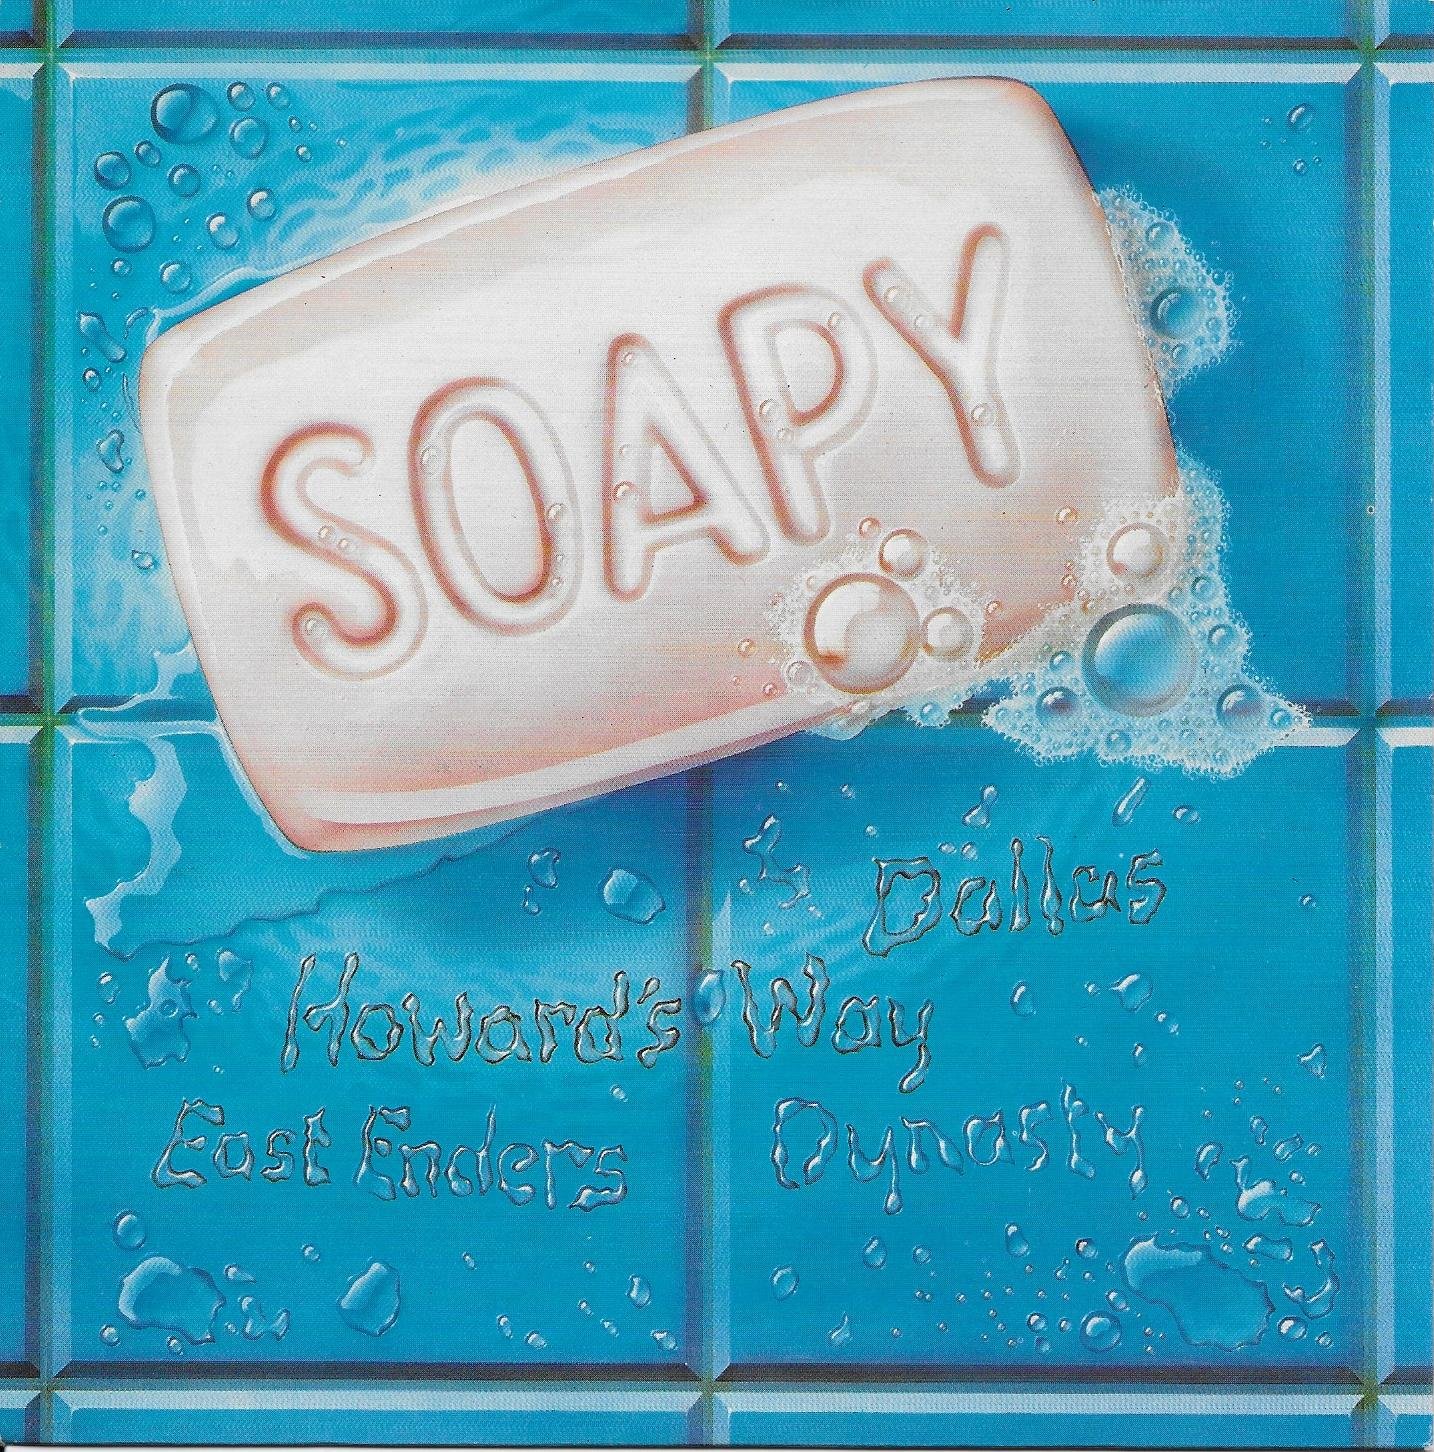 Picture of RESL 206 Soapy by artist Alan Coulthard / Top of the Box from the BBC singles - Records and Tapes library